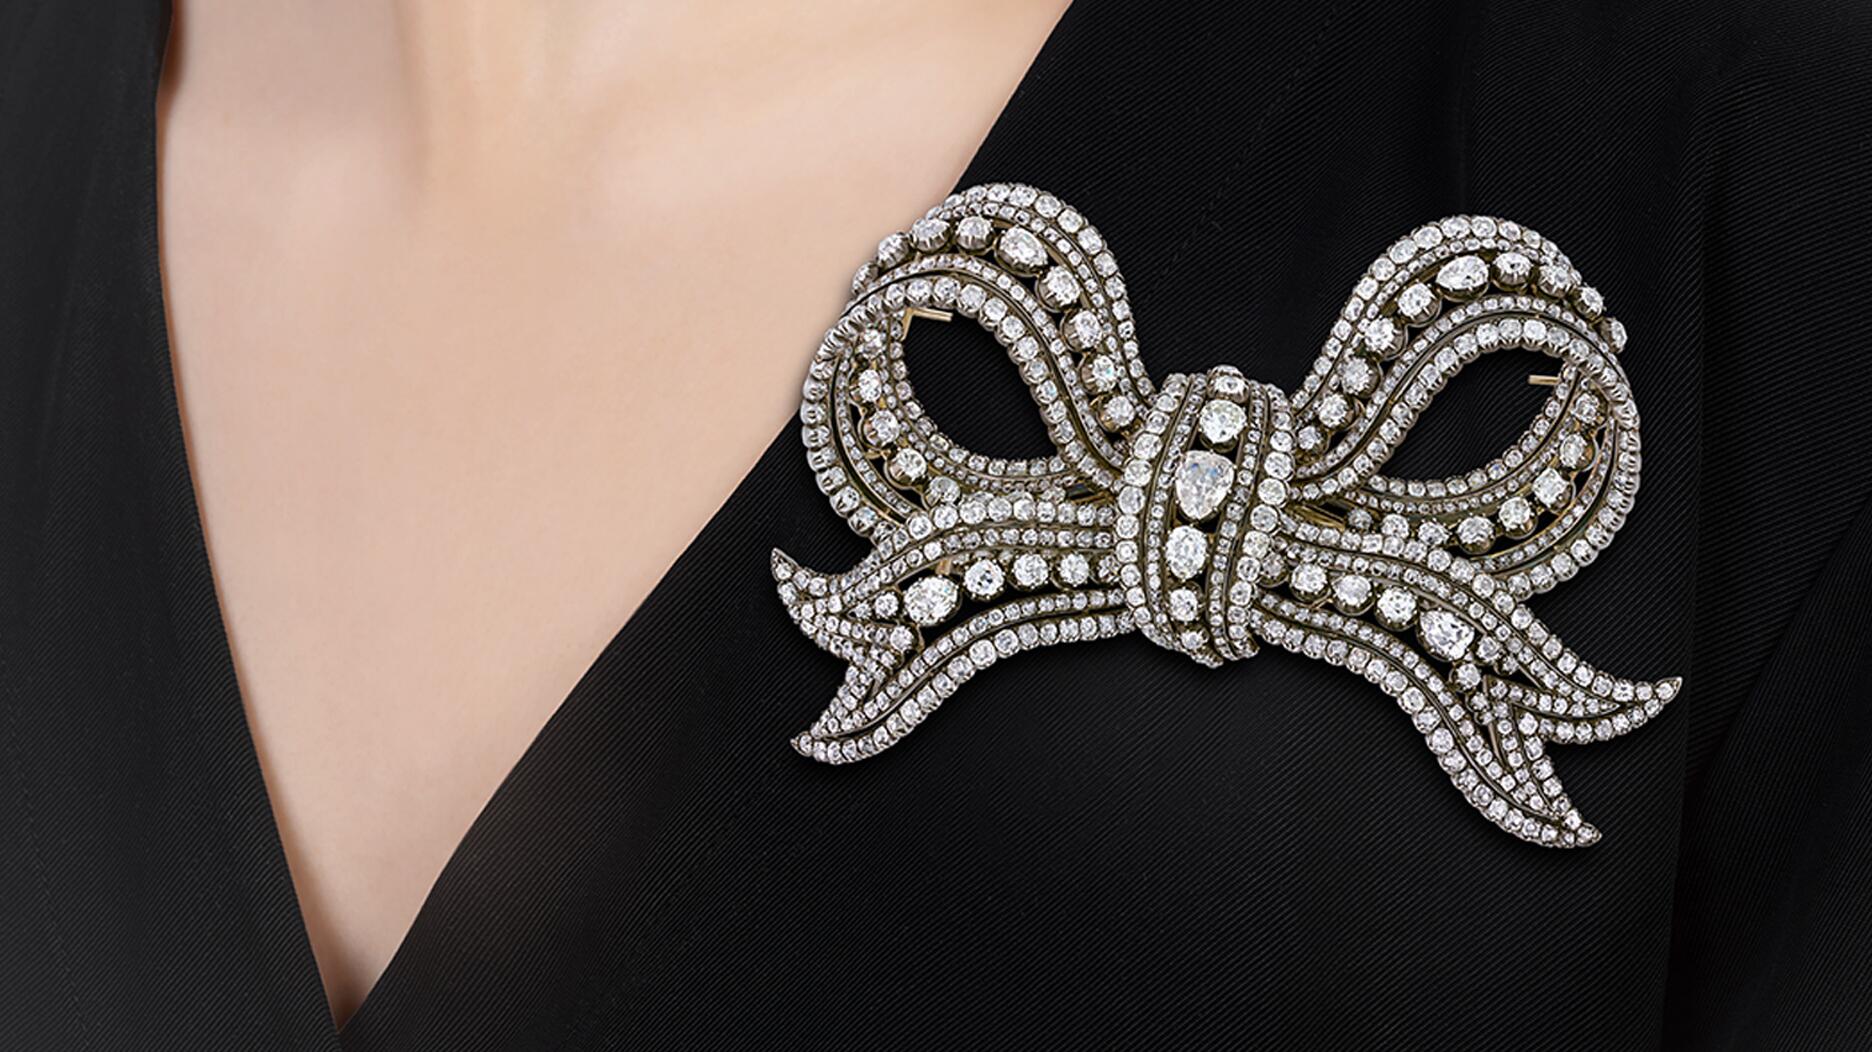 Bow Brooch With Royal History For Sale At $2.7M